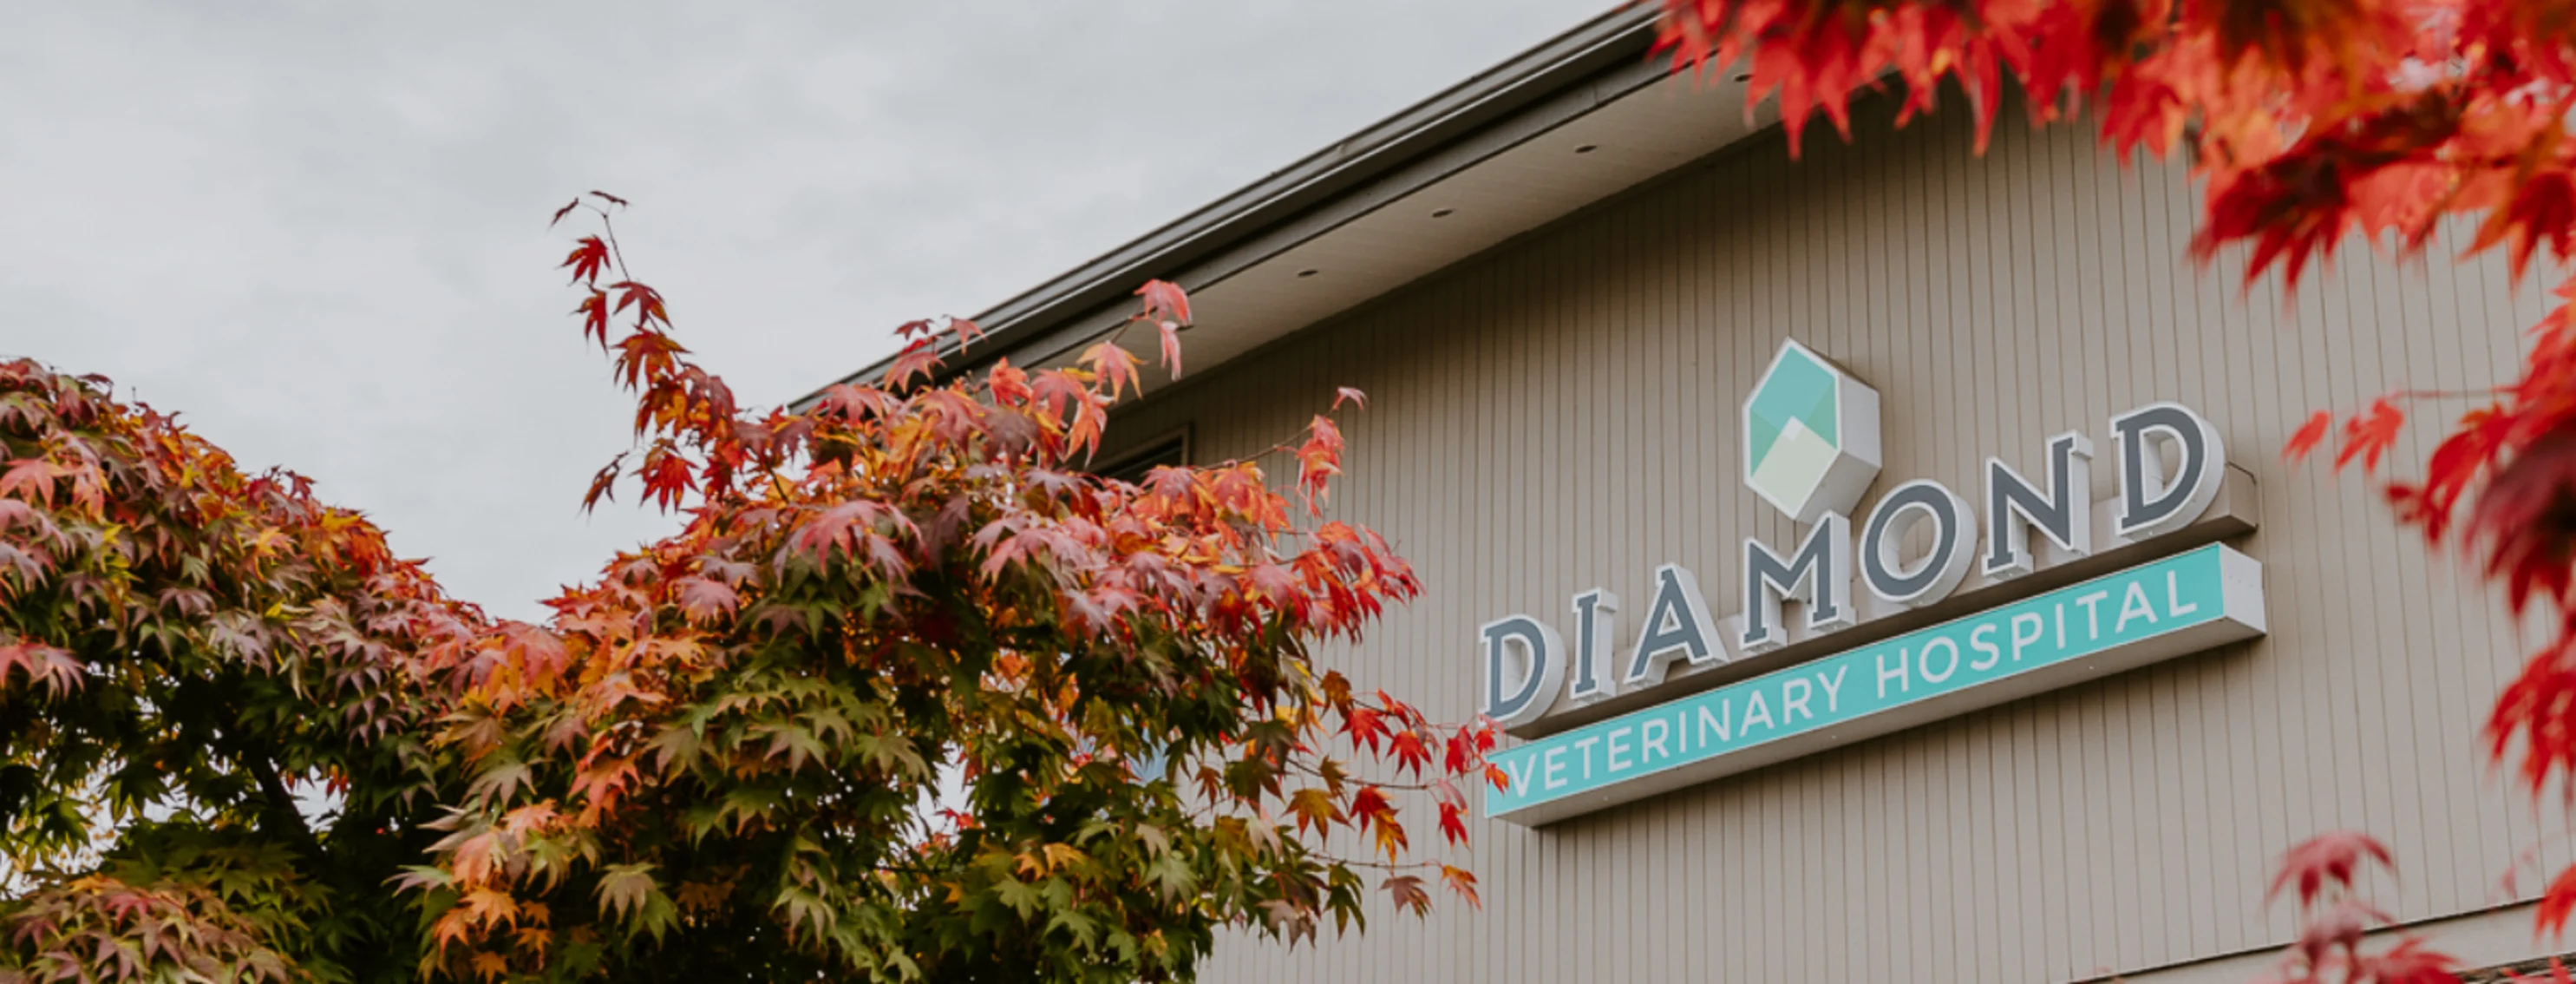 Diamond Veterinary Hospital building external view with red leaves